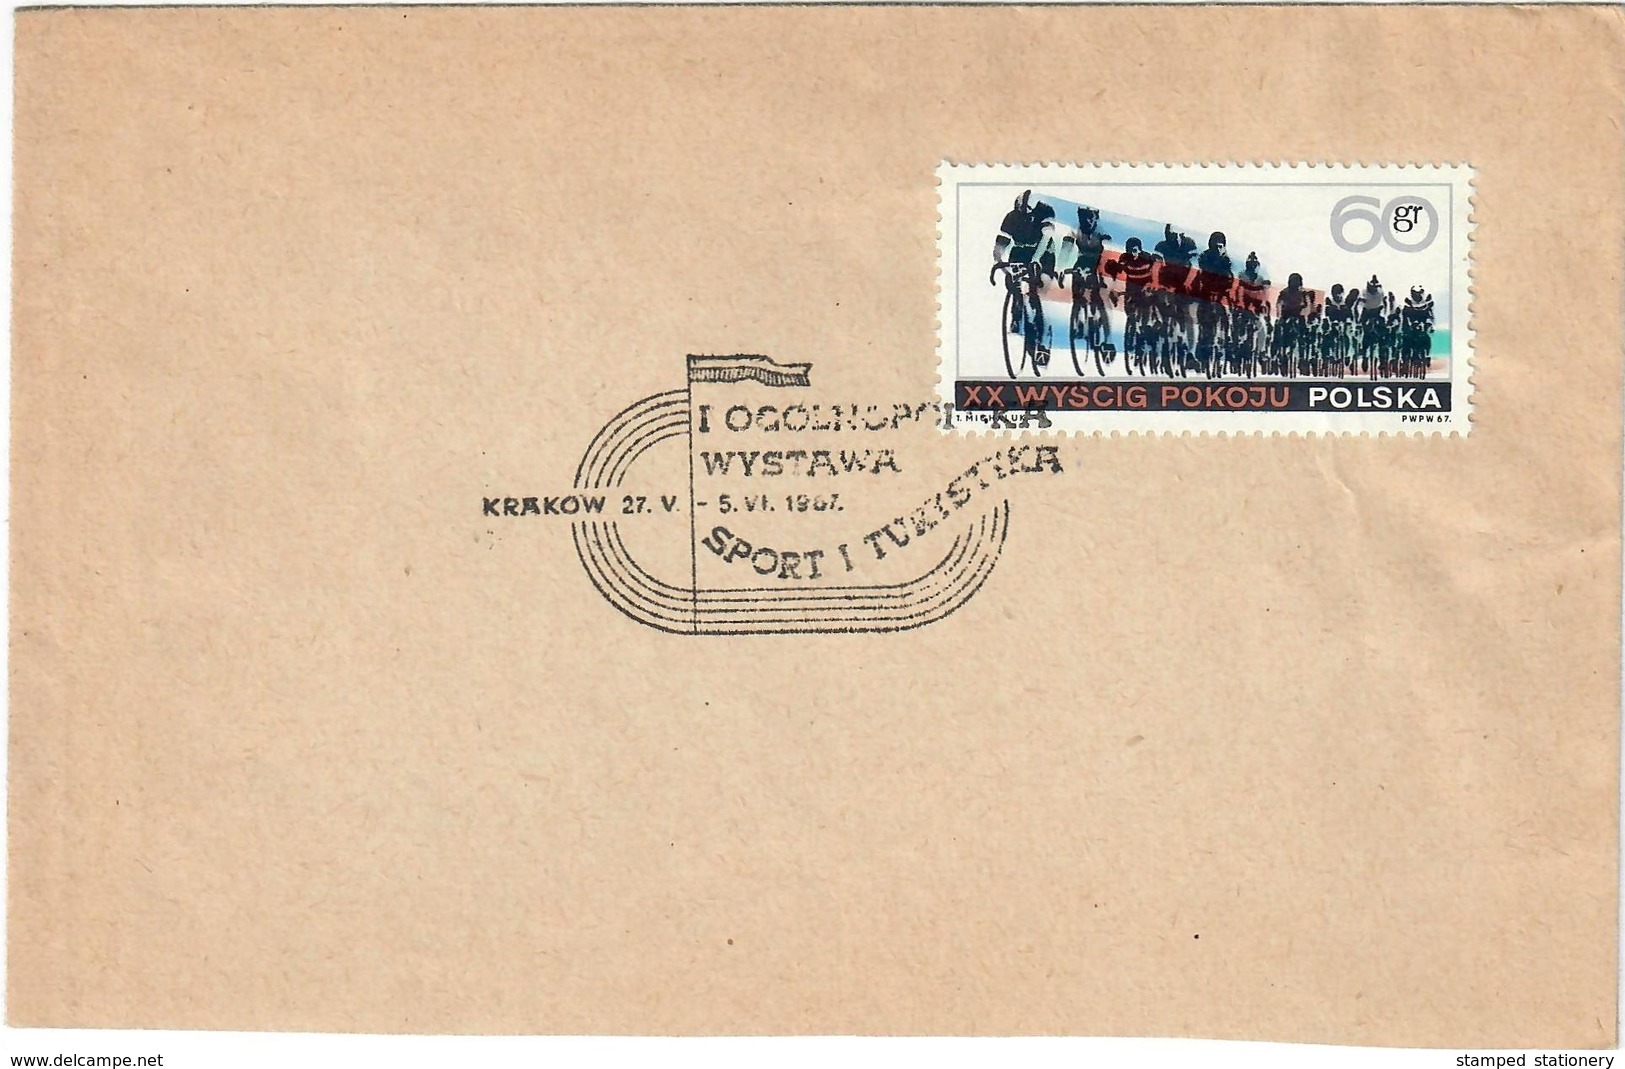 NATIONAL EXHIBITION SPORTS AND TOURISM 27.V-5.VI.1967 KRACOW - 60g. 20 XX INTERNATIONAL CYCLING RACE PEACE SCOTT #1501 - Ciclismo